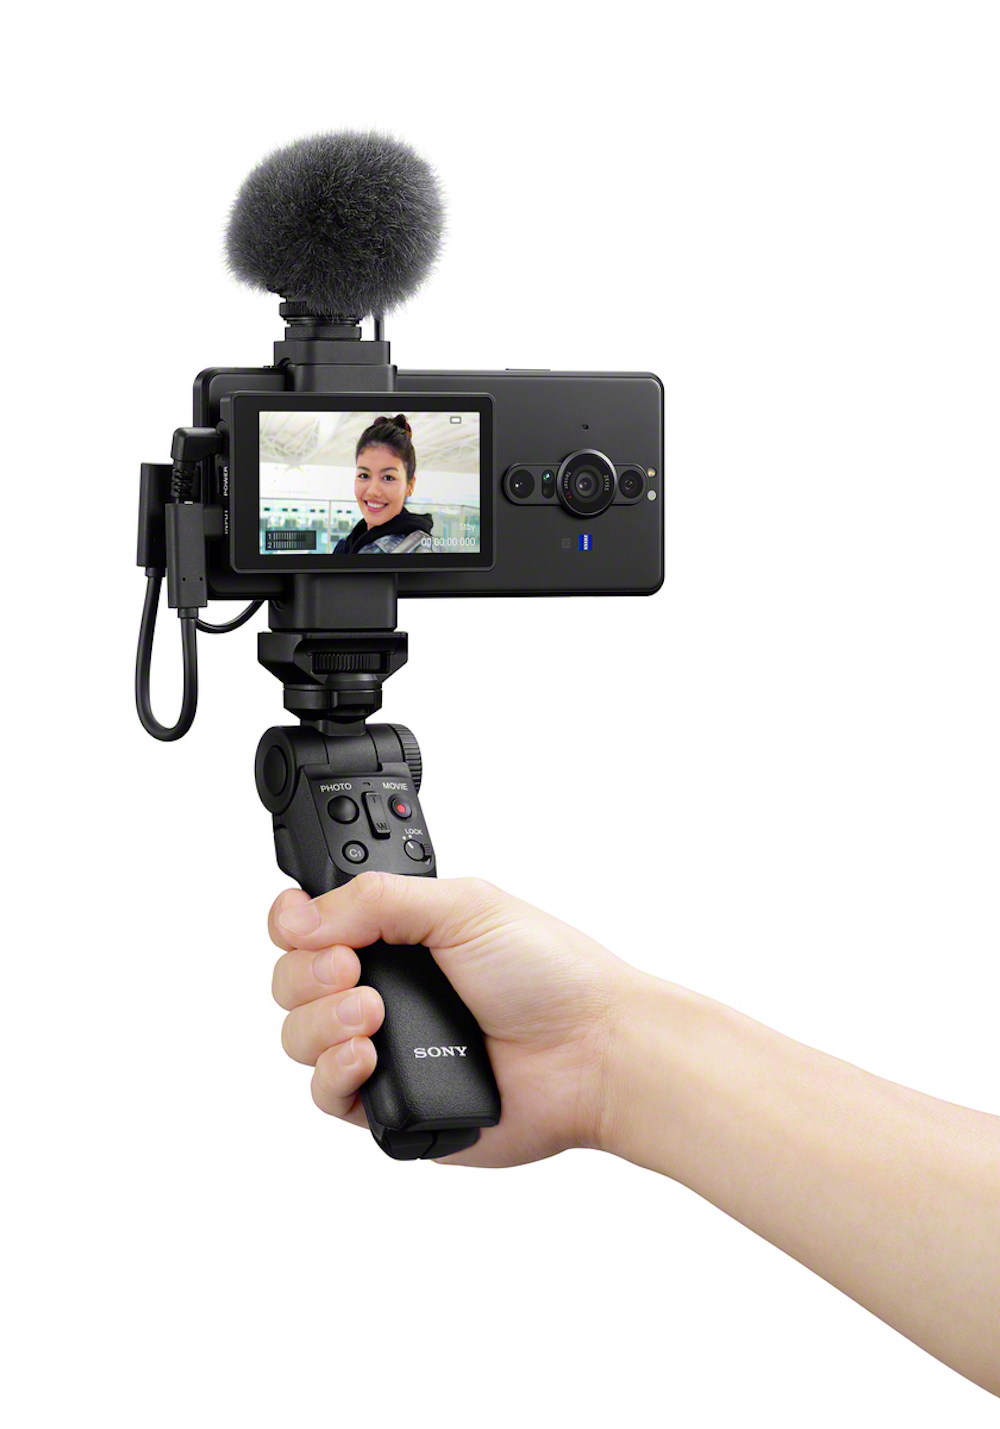 The ECM-G1 mic being used with an Xperia smartphone